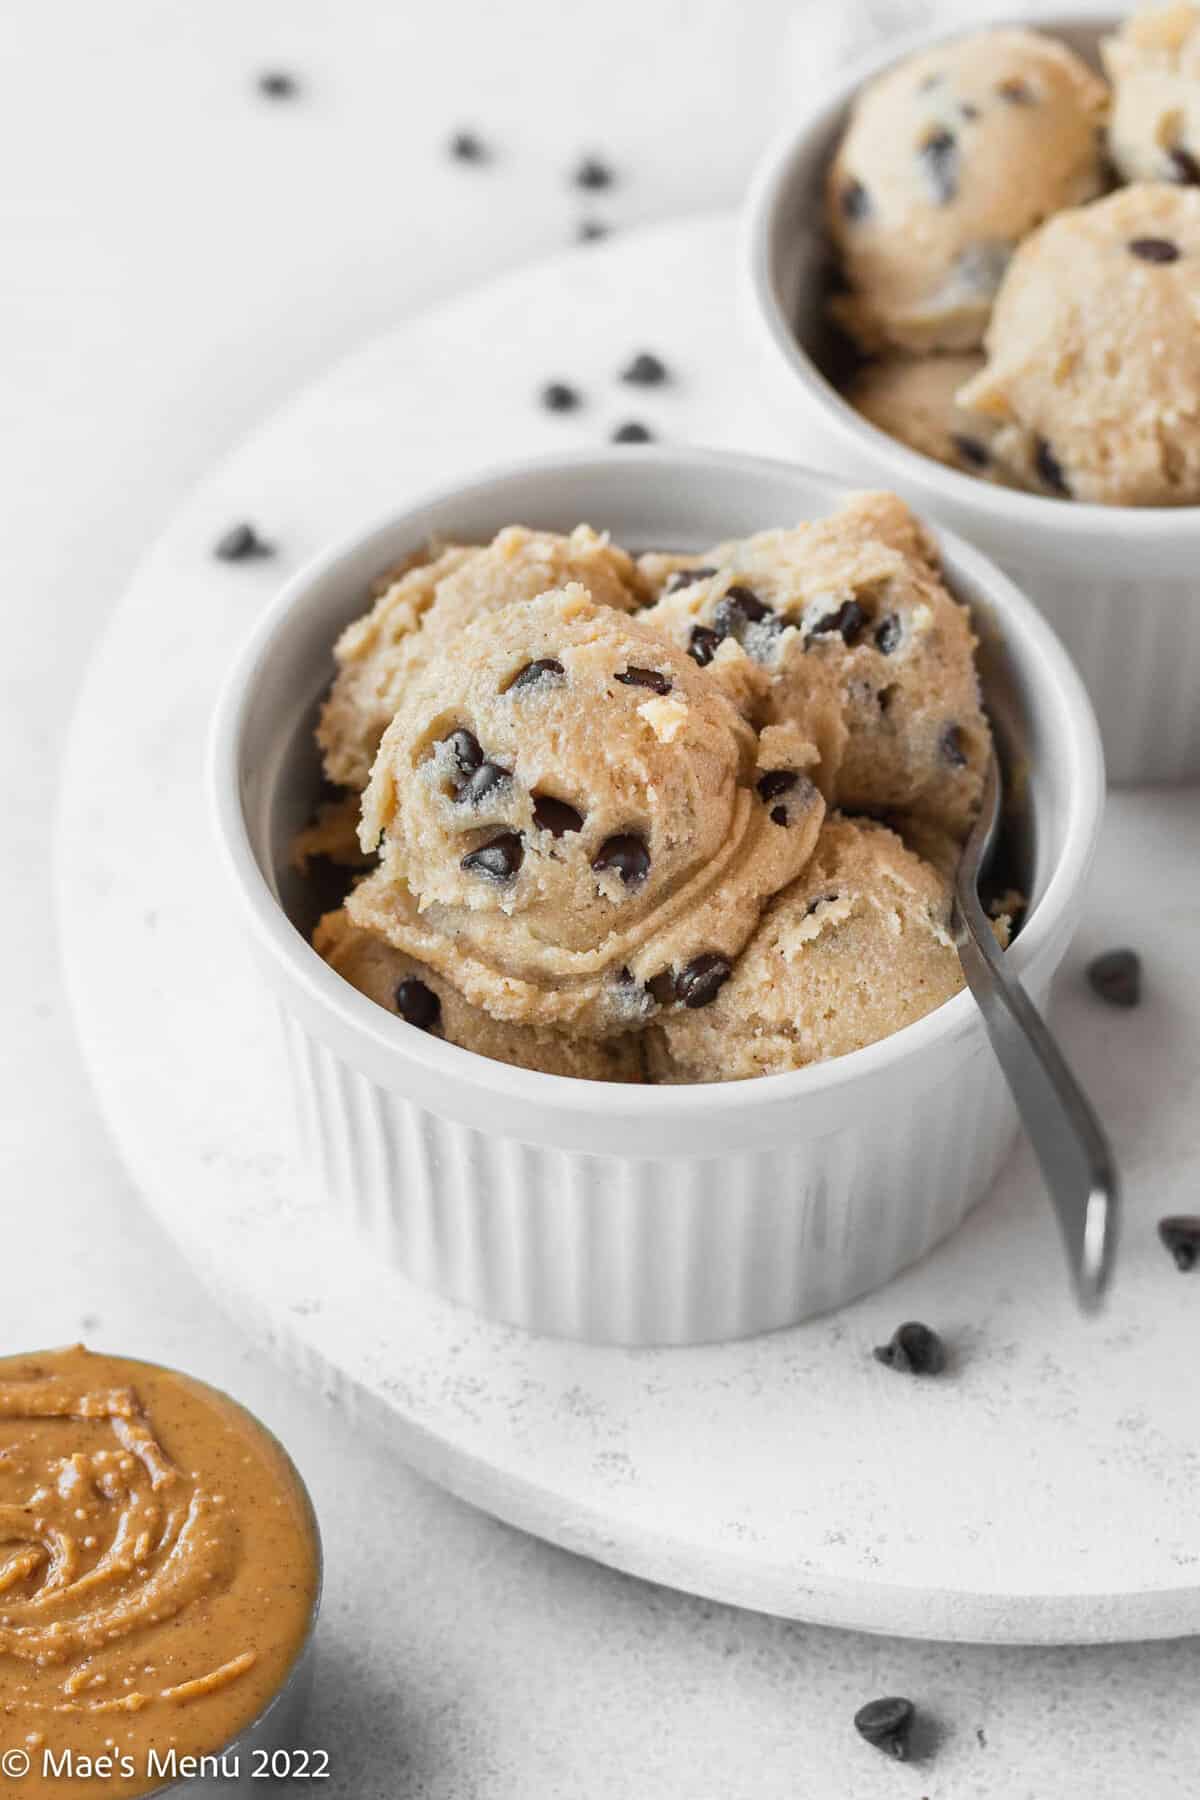 spoon in a bowl filled with scoops of edible cookie dough.